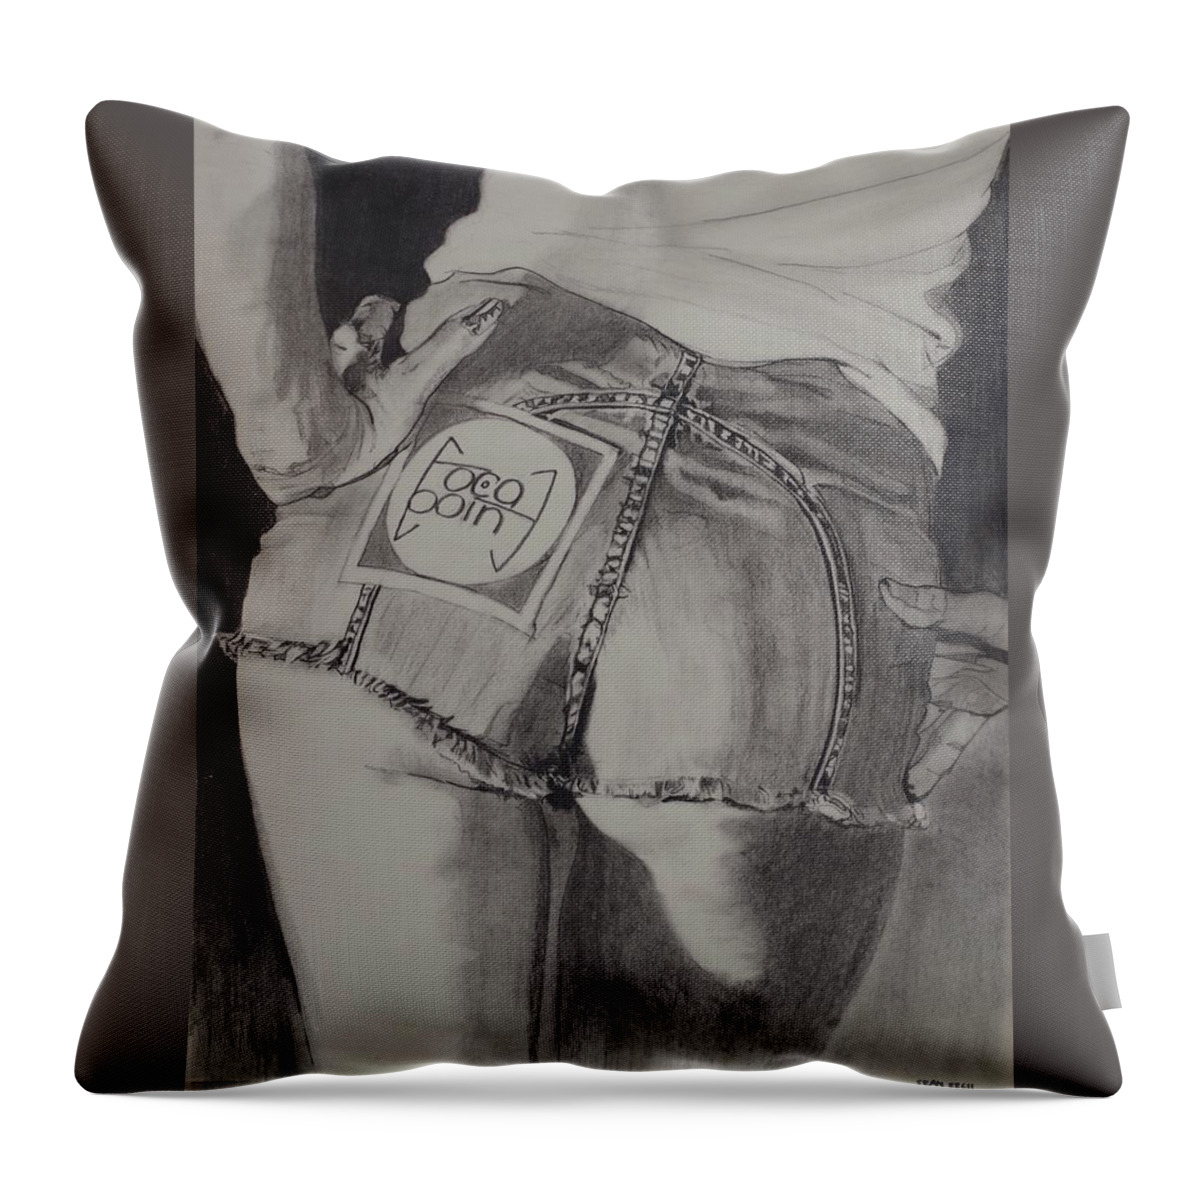 Charcoal Pencil On Paper Throw Pillow featuring the drawing Back In The Seventies by Sean Connolly